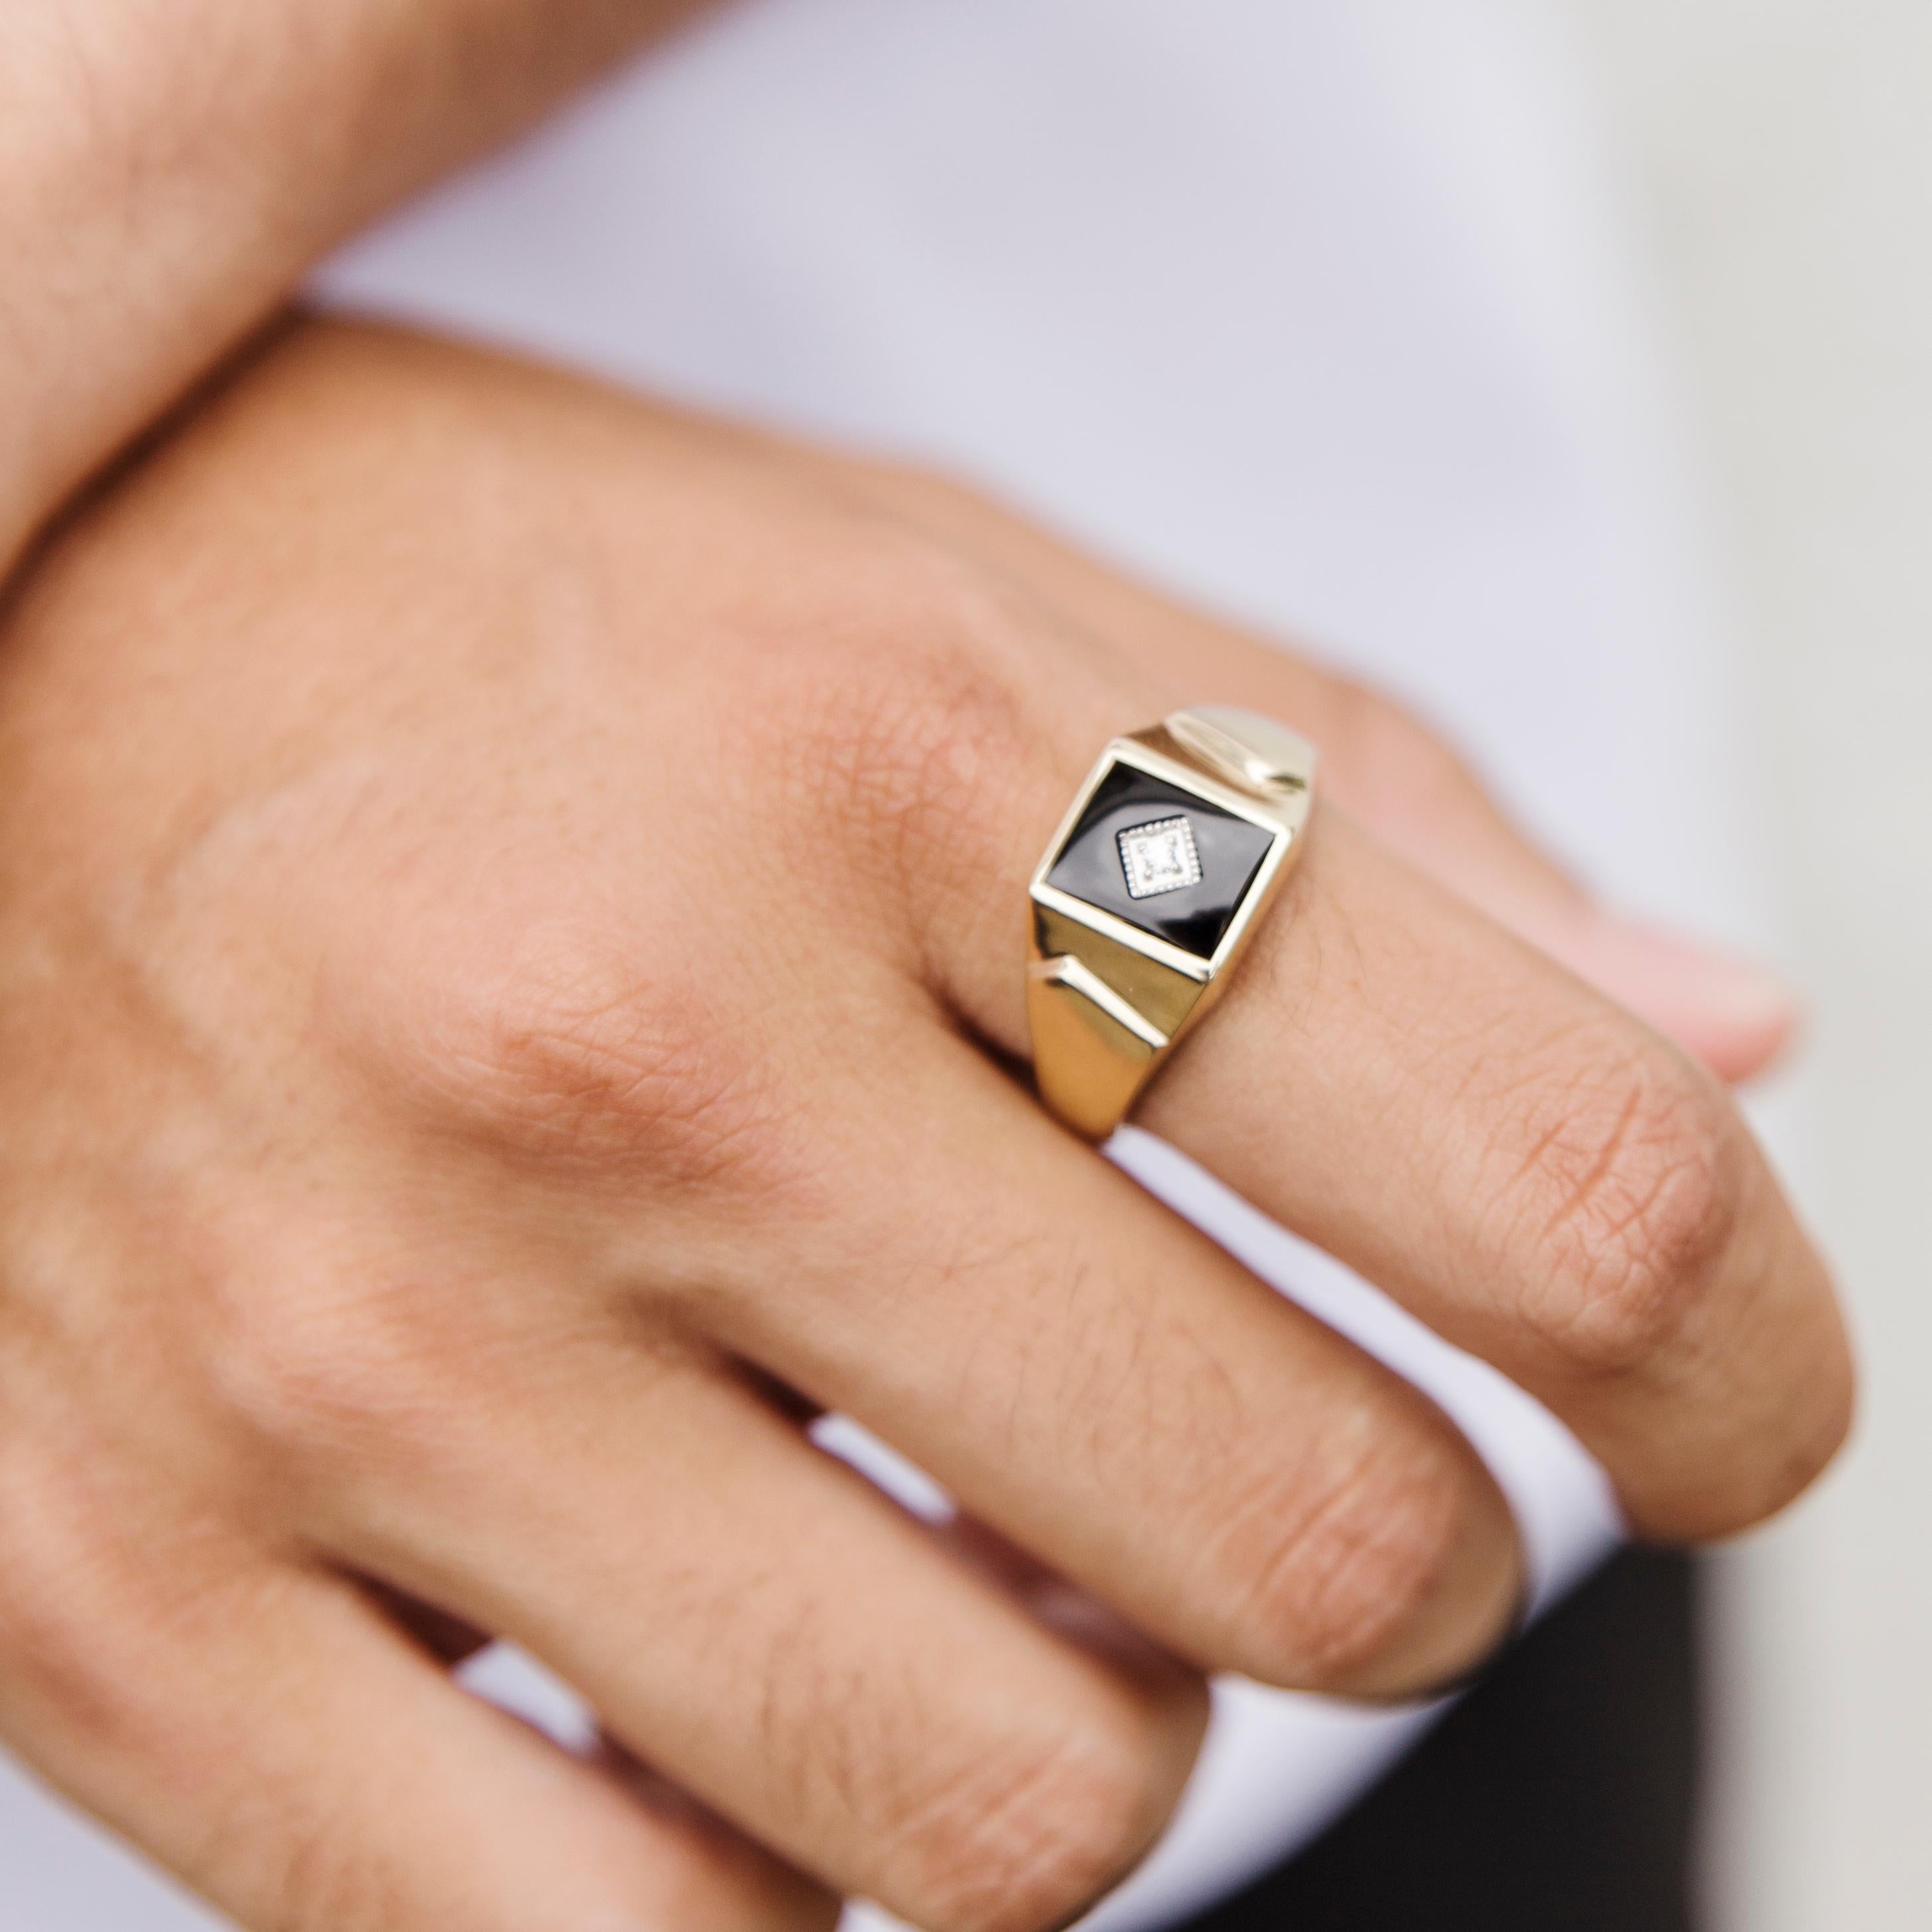 Forged in 9 carat yellow gold, this distinctive men's signet ring features a high polish band flowing out into a raised flat top set with a black rectangular onyx and a sparkling round diamond in the centre. This dapper vintage men's signet ring is